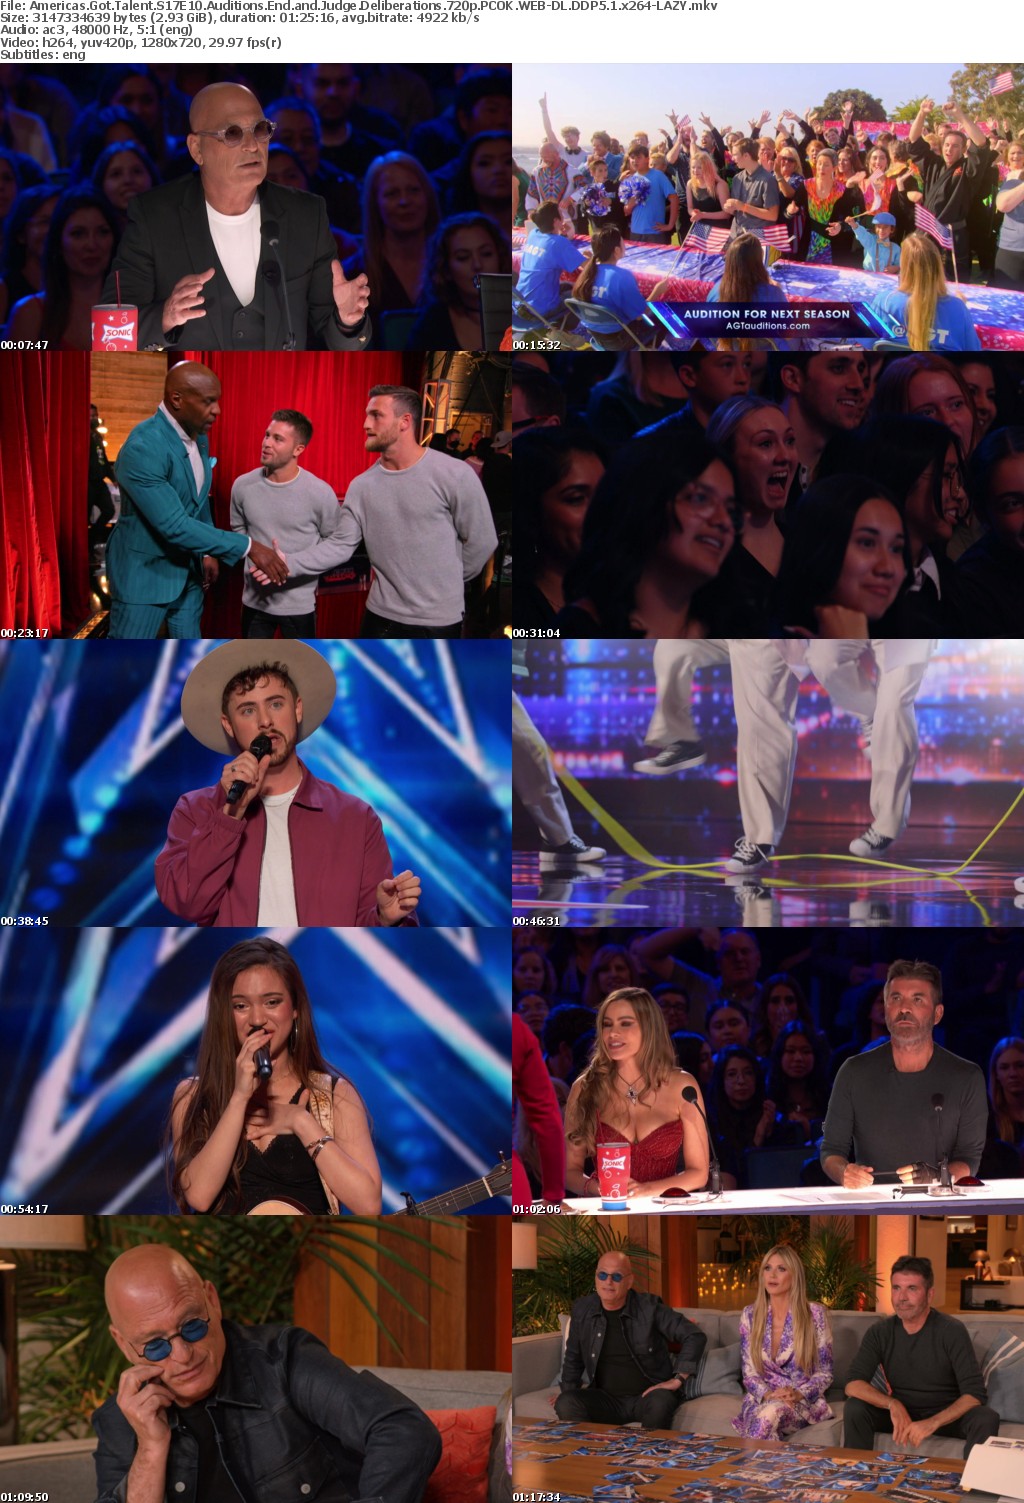 Americas Got Talent S17E10 Auditions End and Judge Deliberations 720p PCOK WEBRip DDP5 1 x264-LAZY